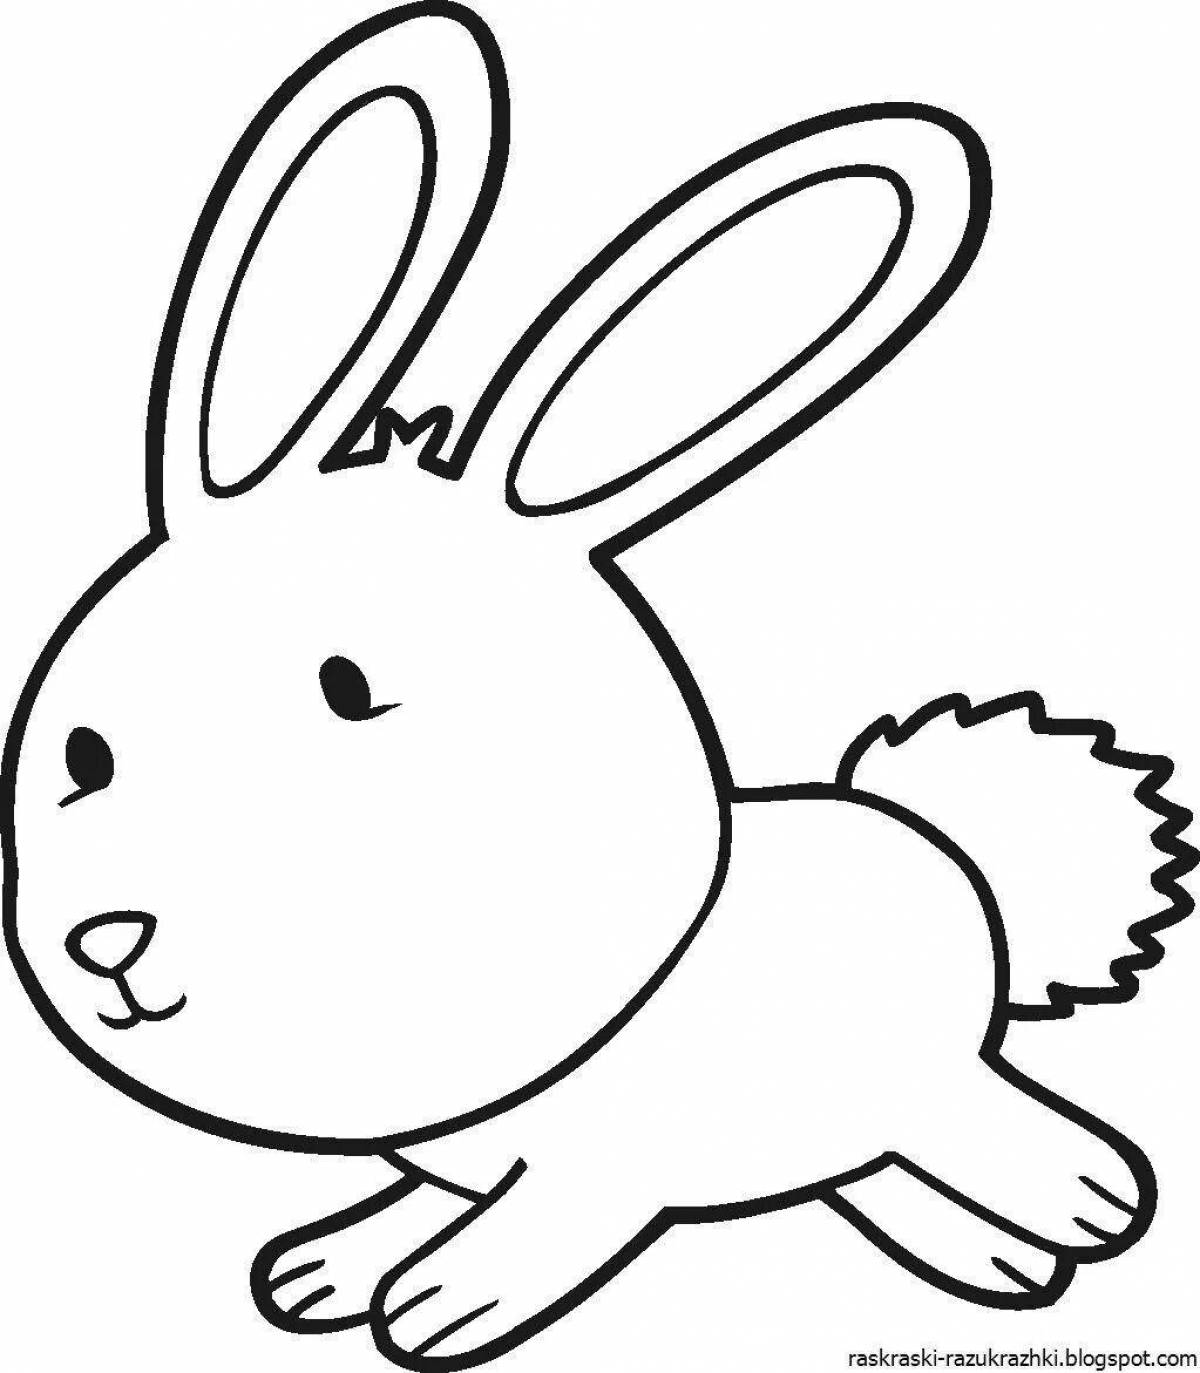 Coloring book with baby bunny floppy disk